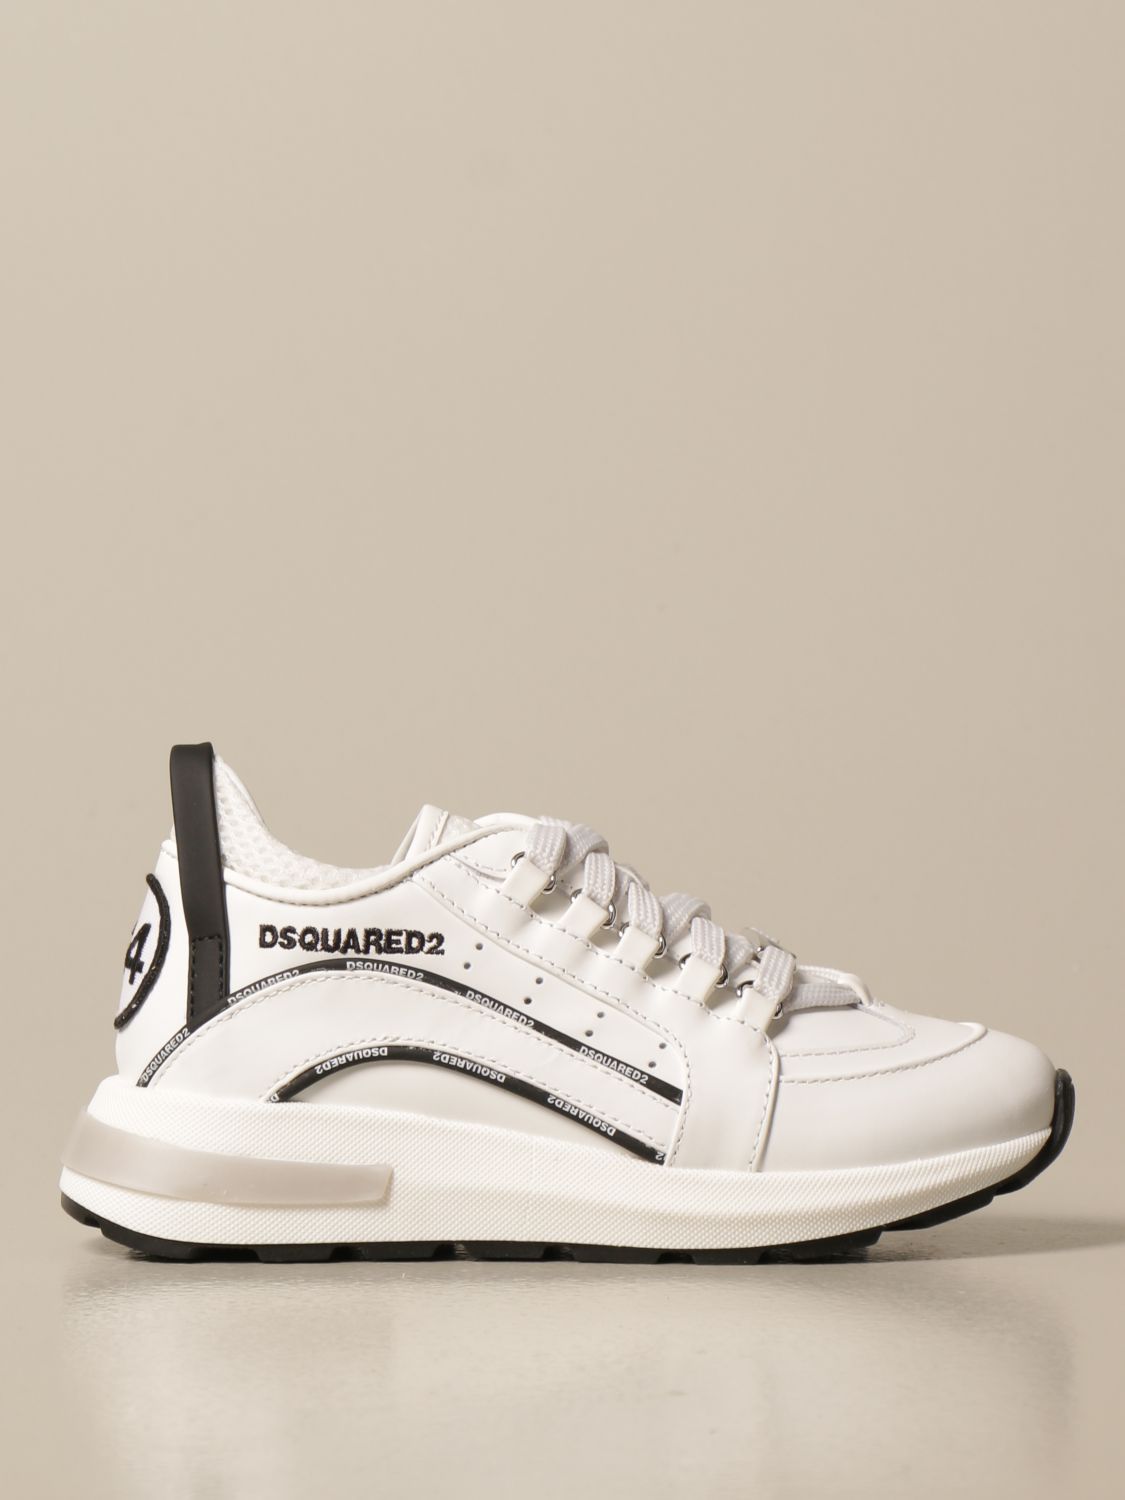 Buy > dsquared2 zapatos > in stock